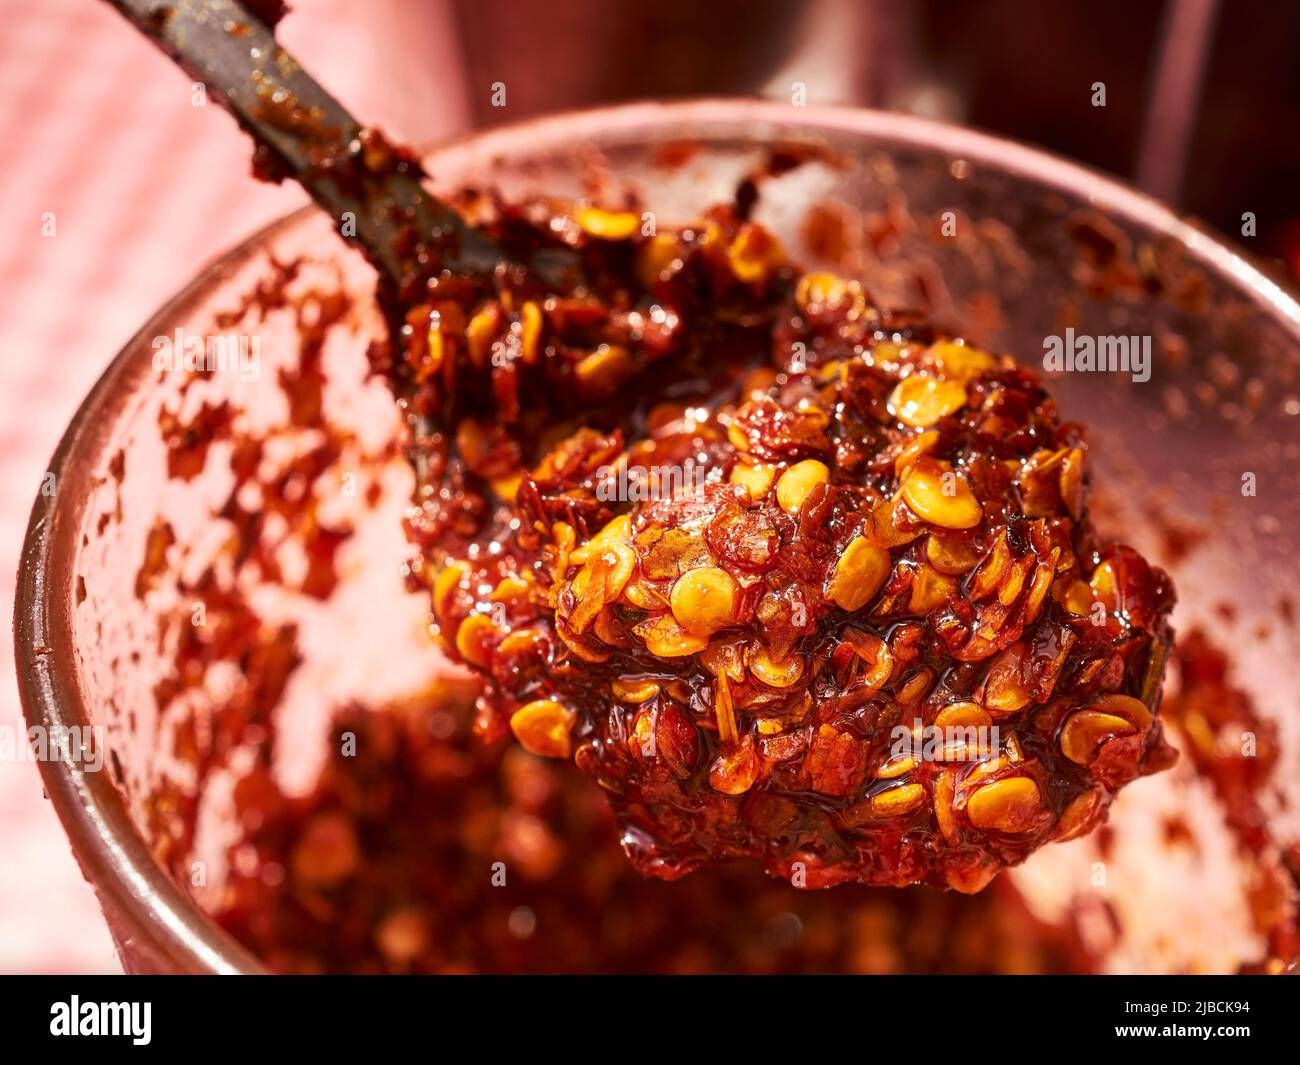 A spoonful of hot chili oil, Little Thailand, Queens, New York City, USA Stock Photo